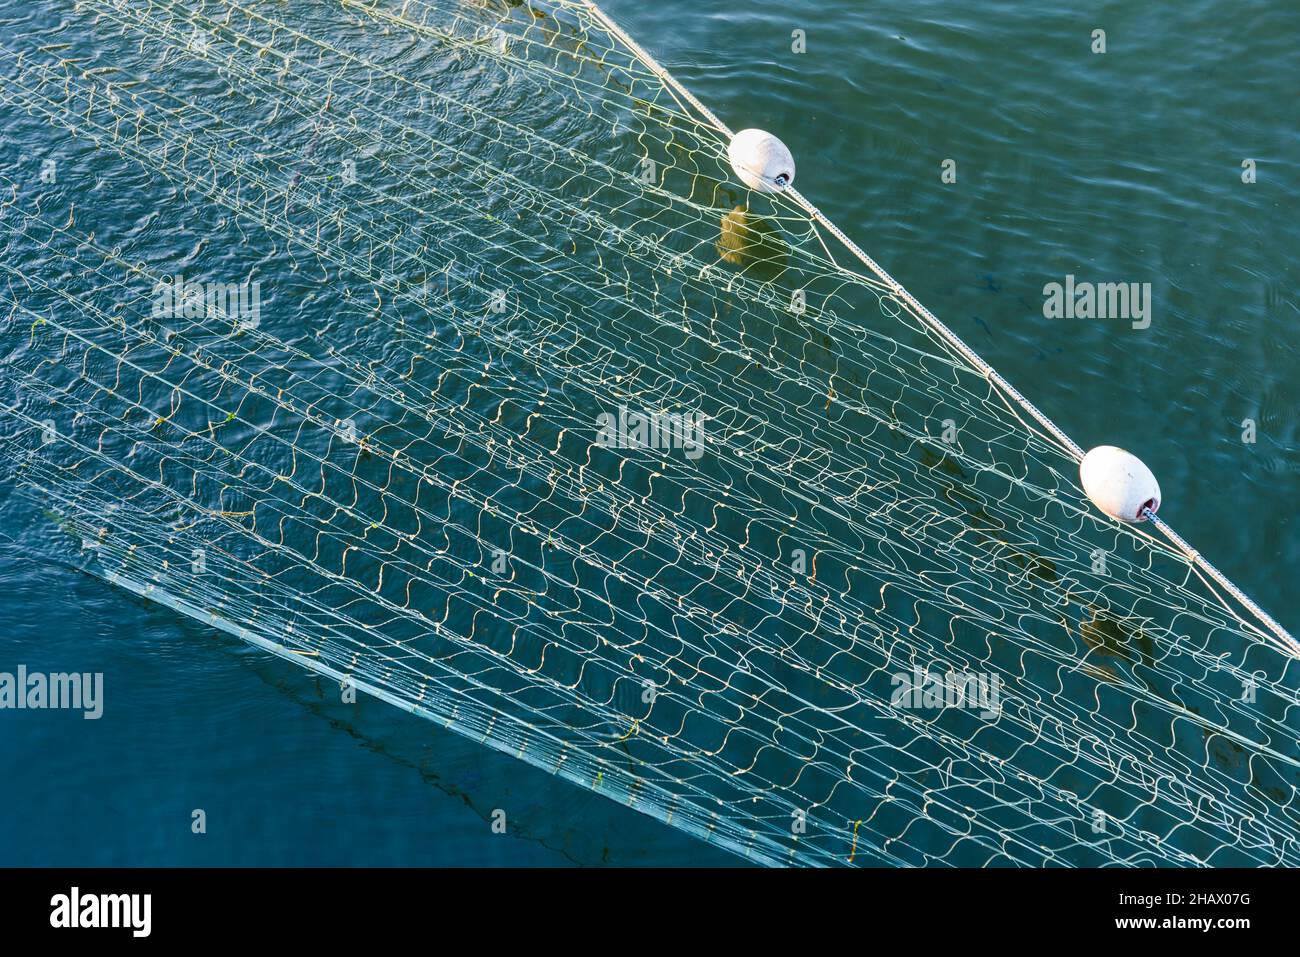 https://c8.alamy.com/comp/2HAX07G/a-commercial-fishing-net-is-pulled-tight-the-mesh-is-floating-on-the-water-with-the-support-of-white-floats-2HAX07G.jpg